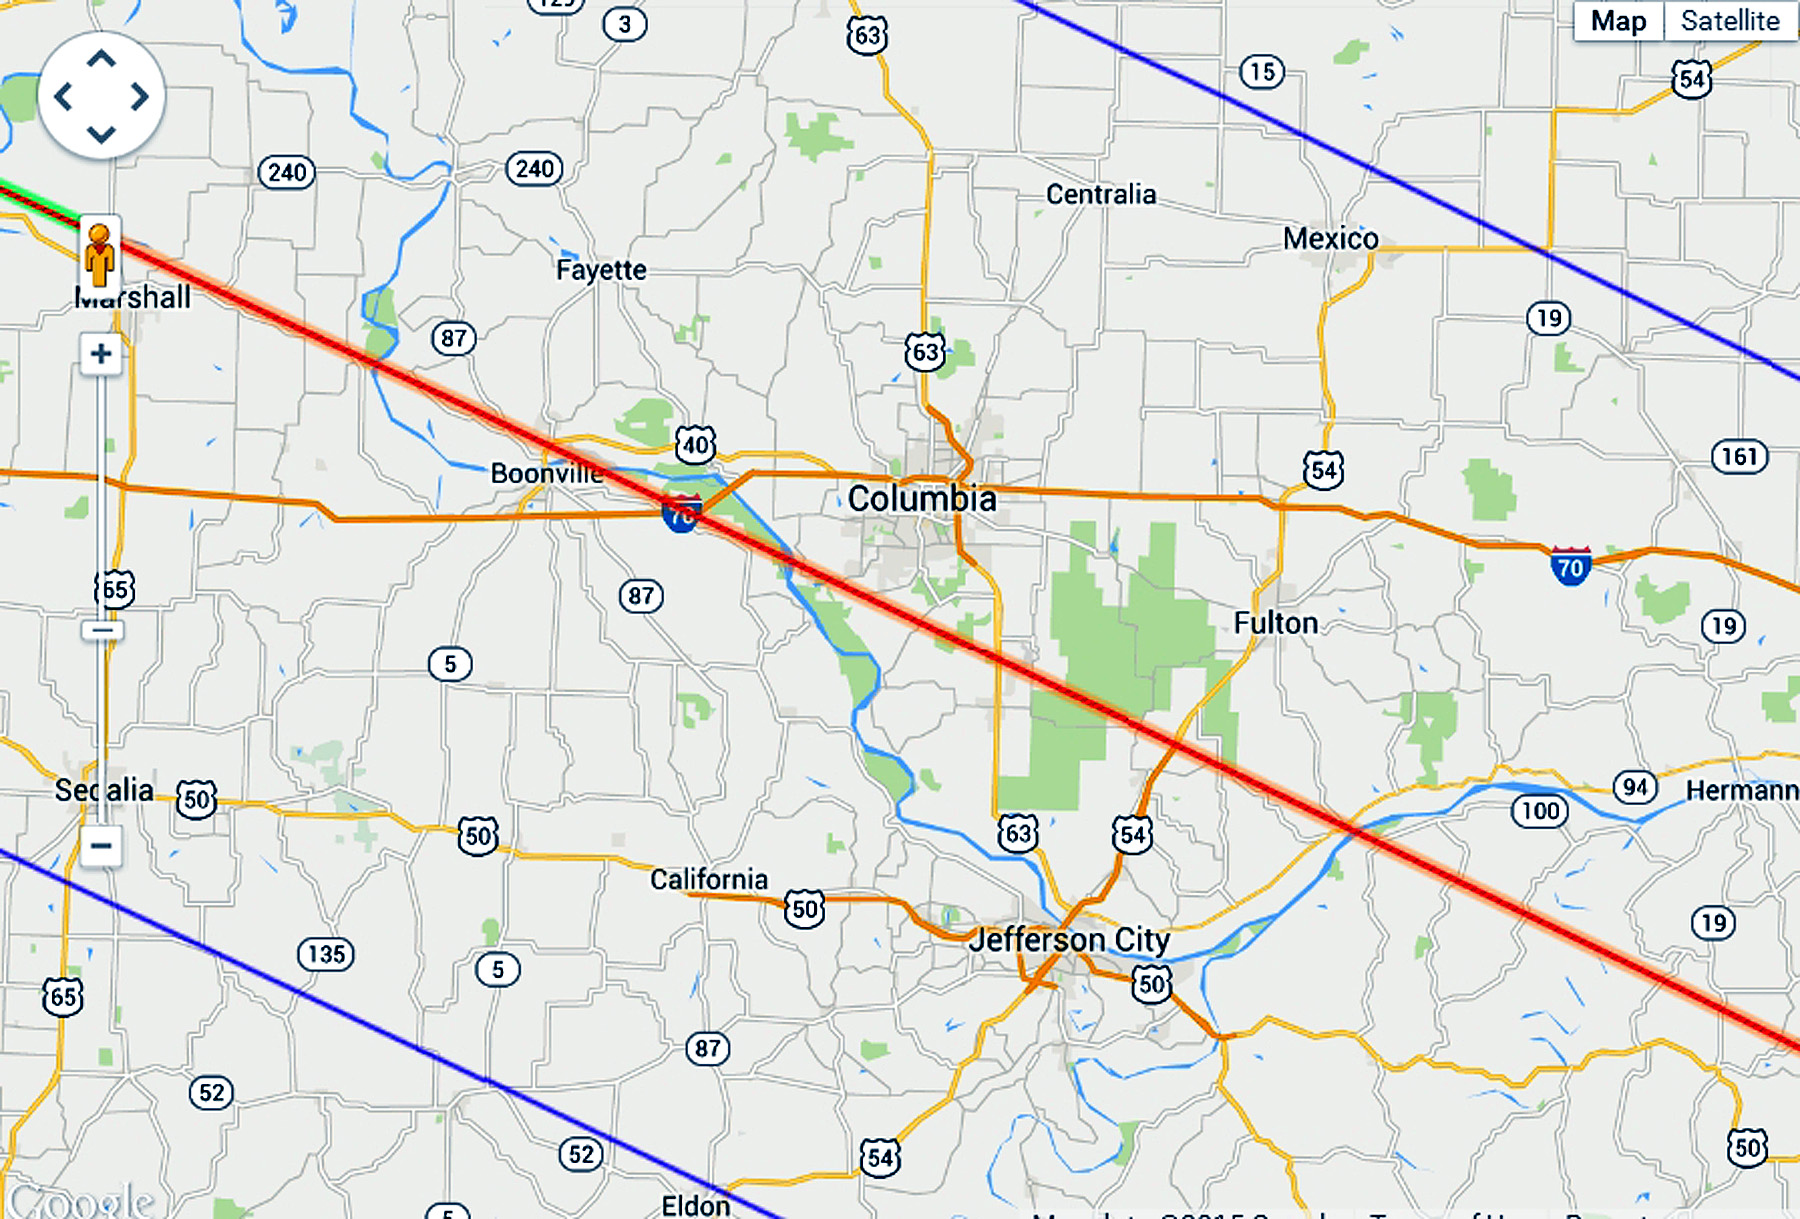 Eclipse 2017 - A52 - Path of Totality over Columbia Missouri